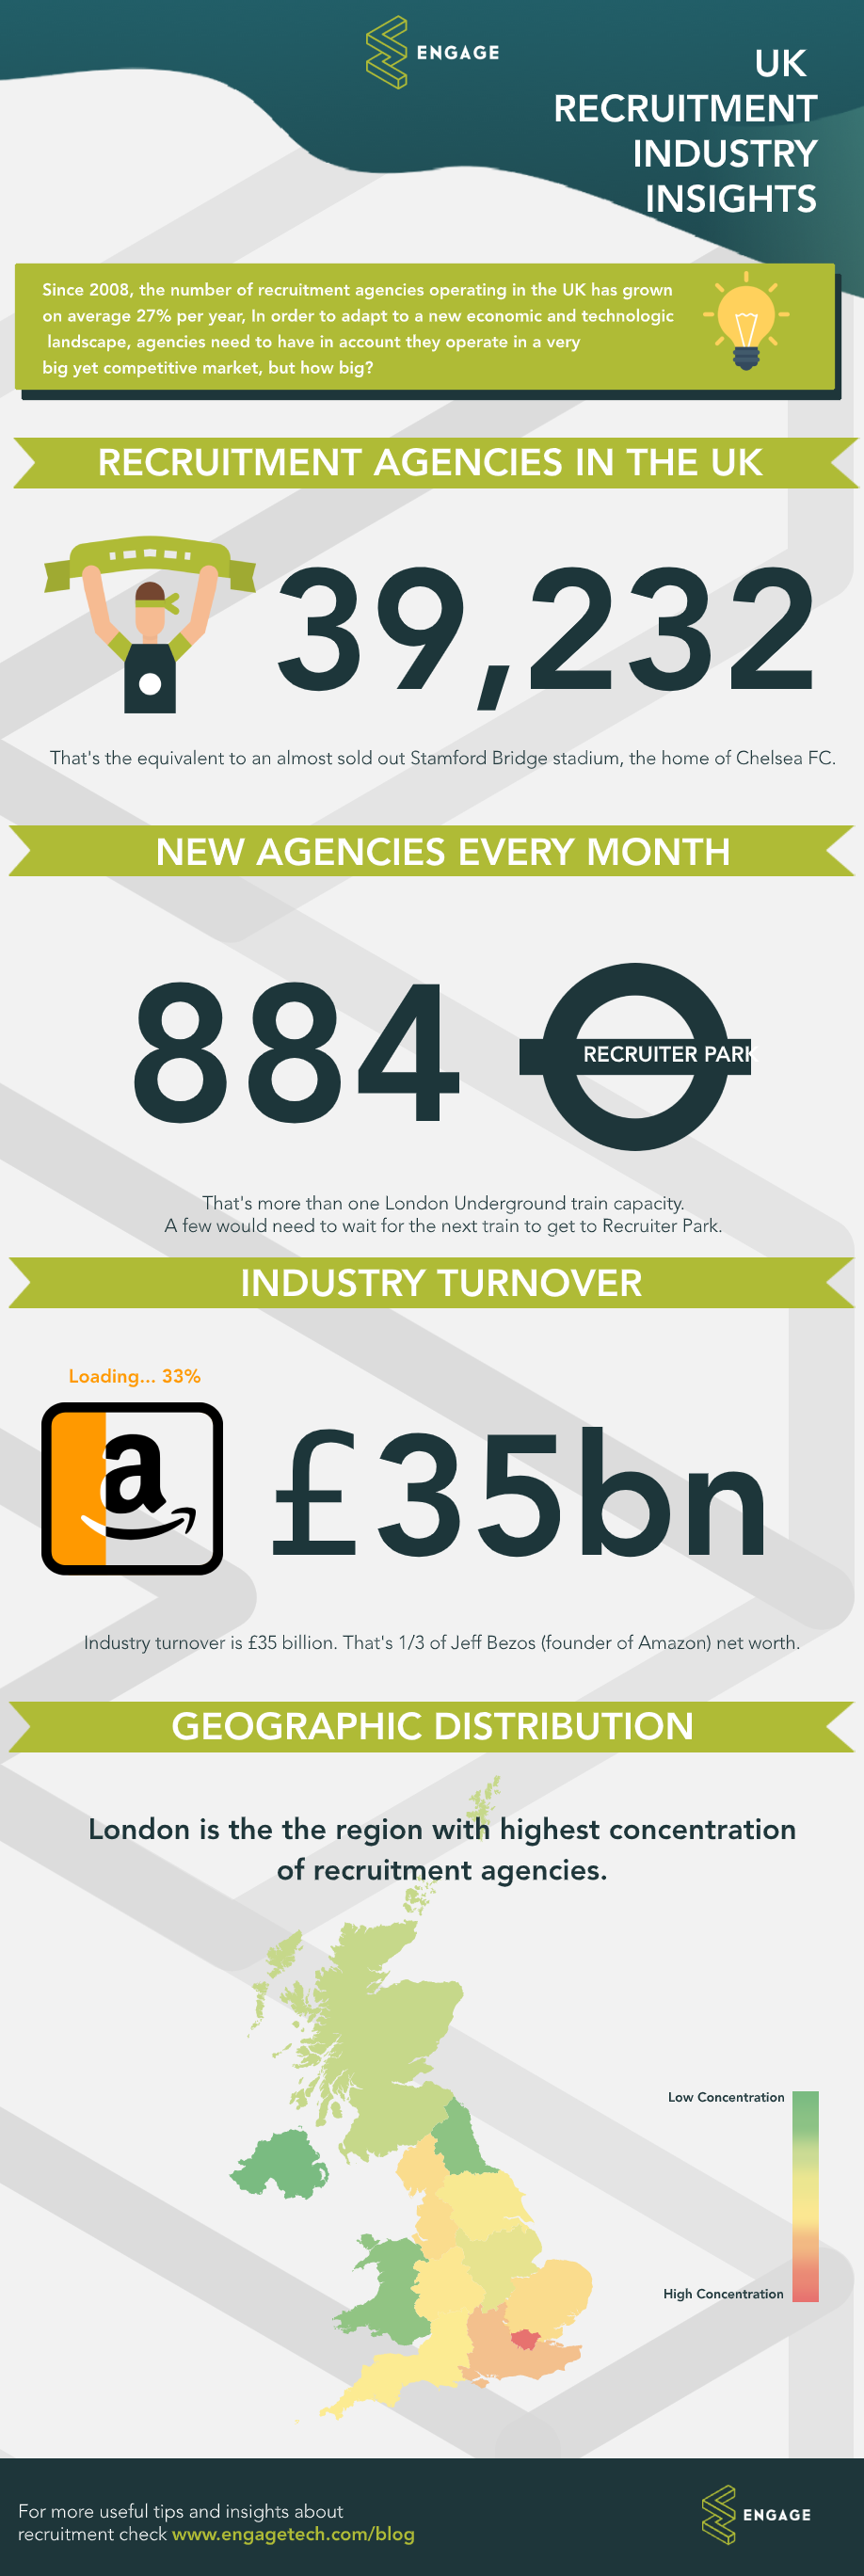 UK Recruitment Industry Insights Infographic 2019